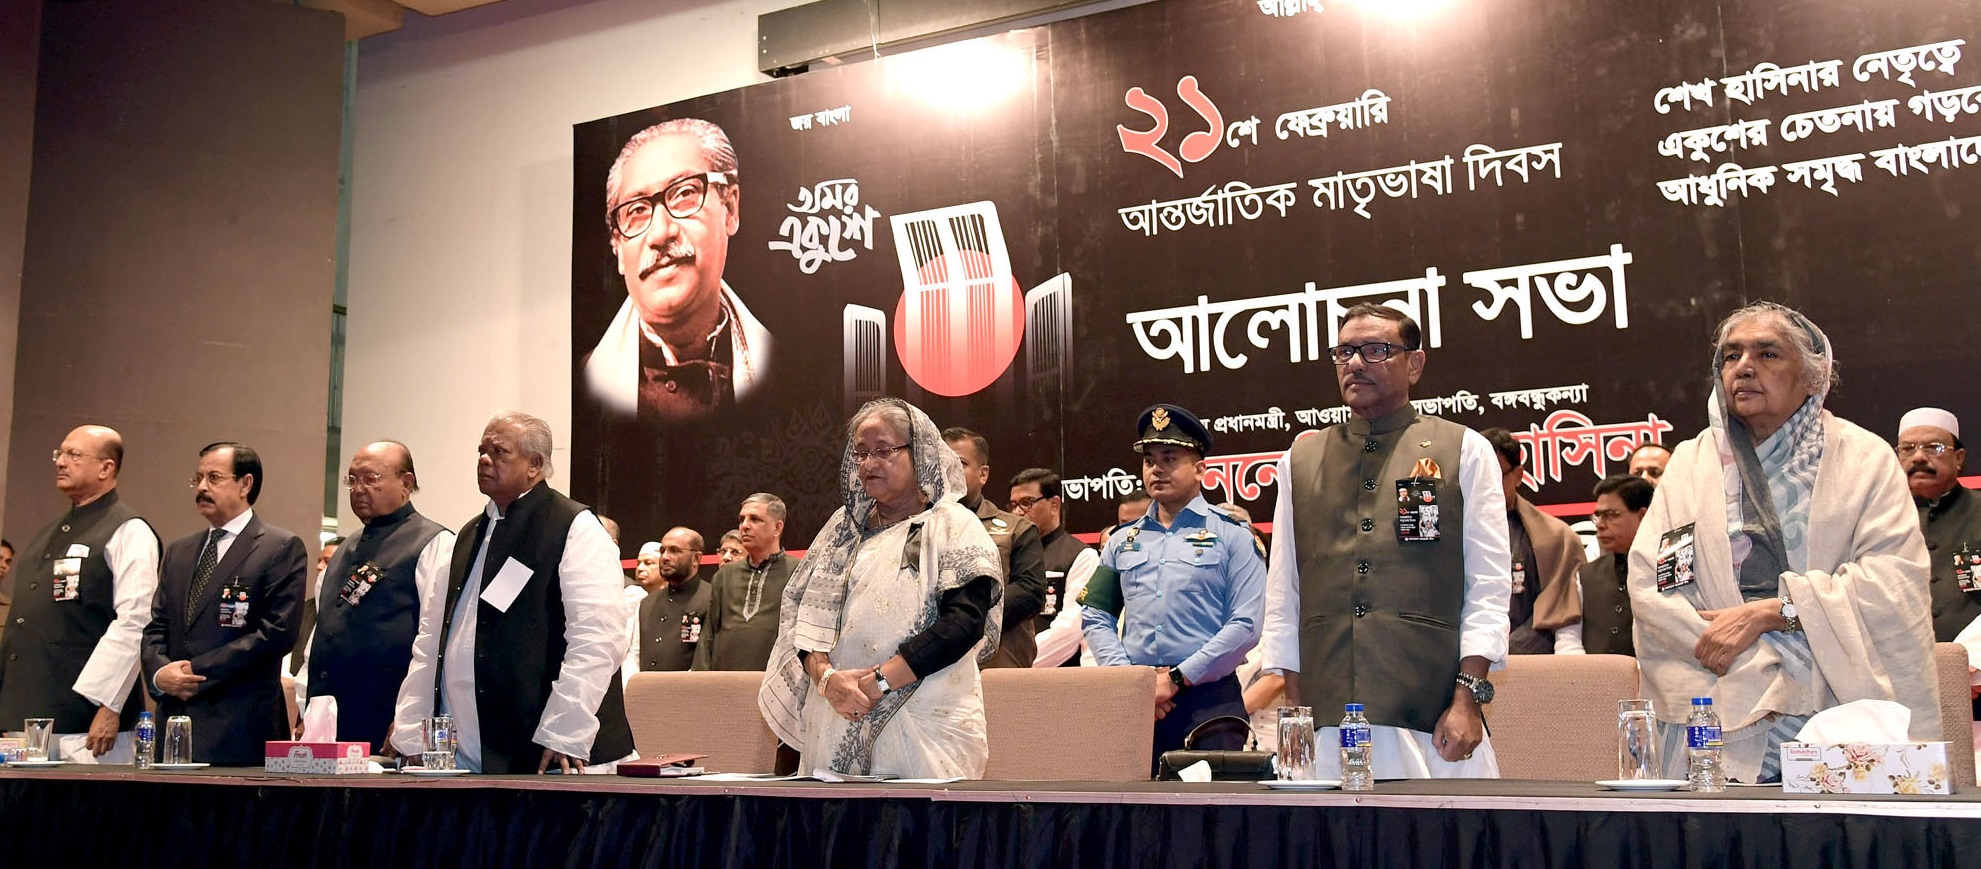 No one can destroy Bengali culture: Hasina